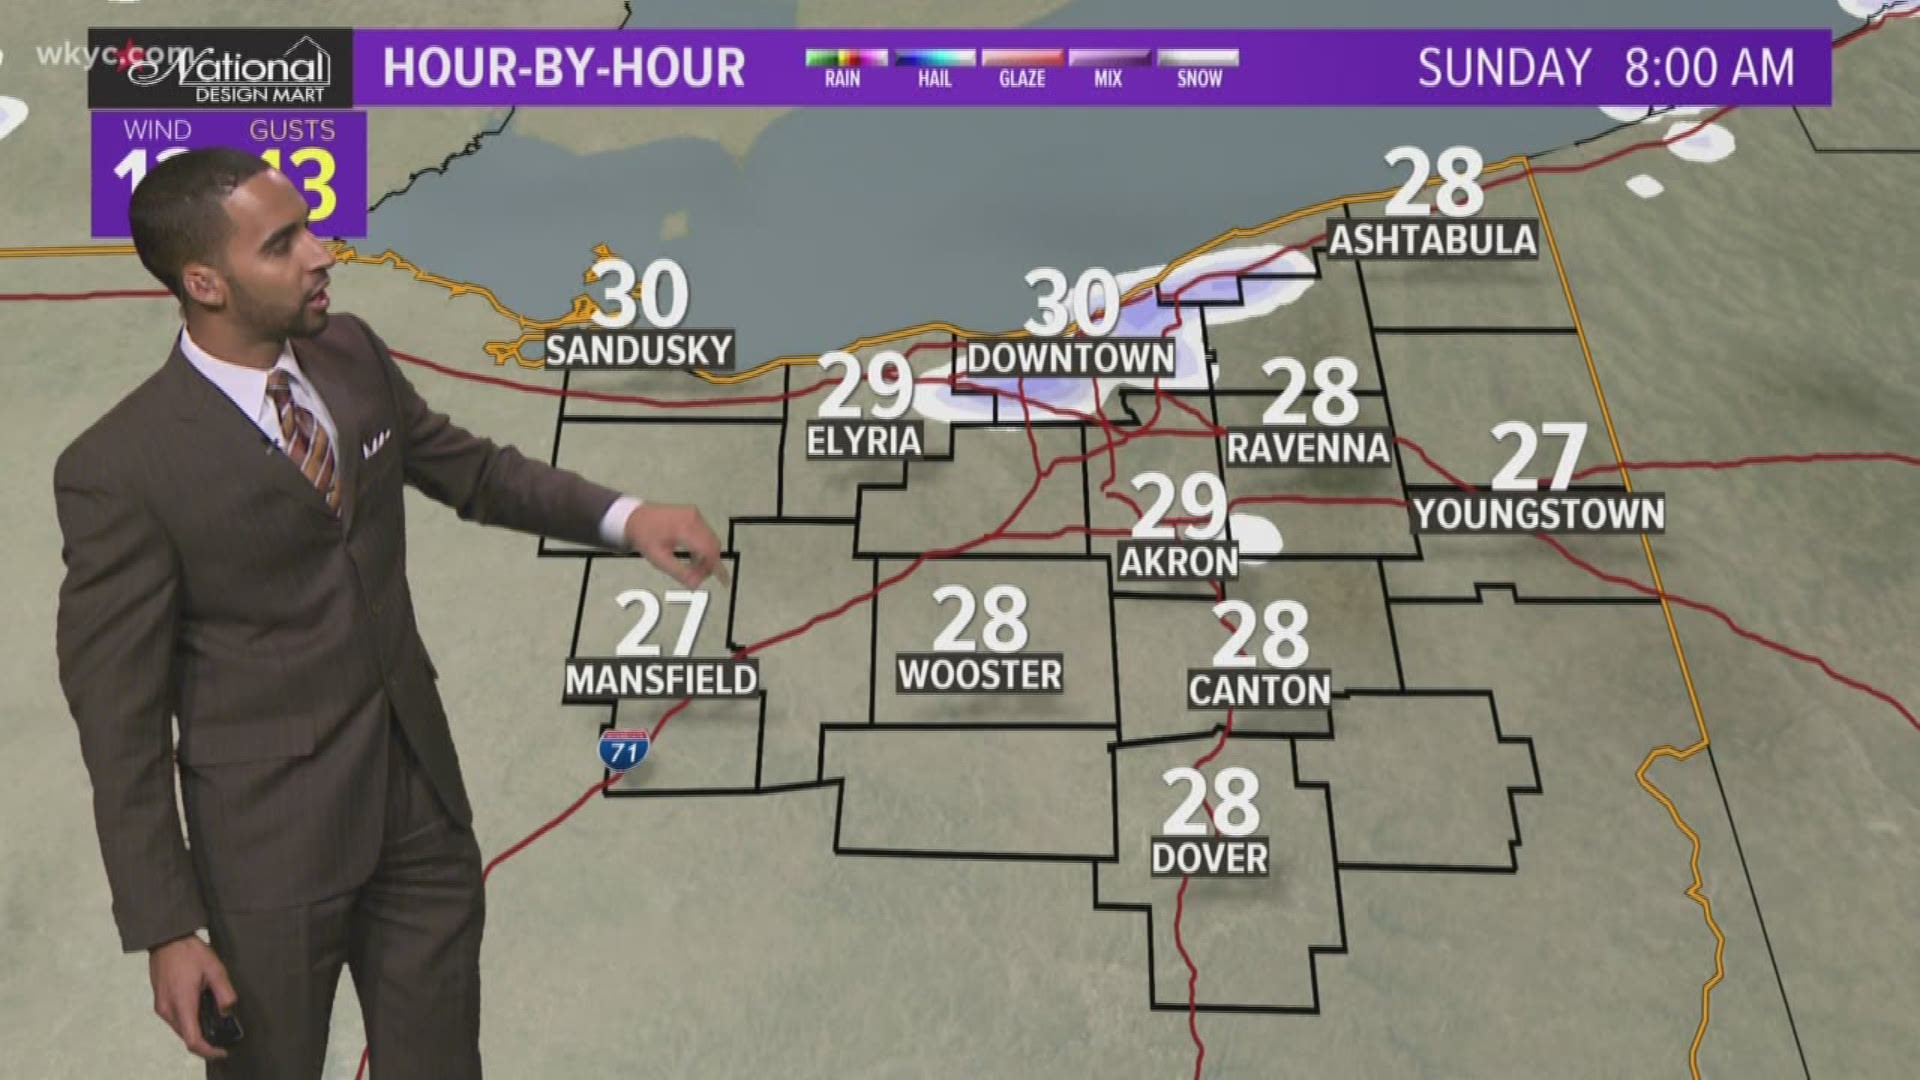 Scattered rain and snow is expected Sunday.